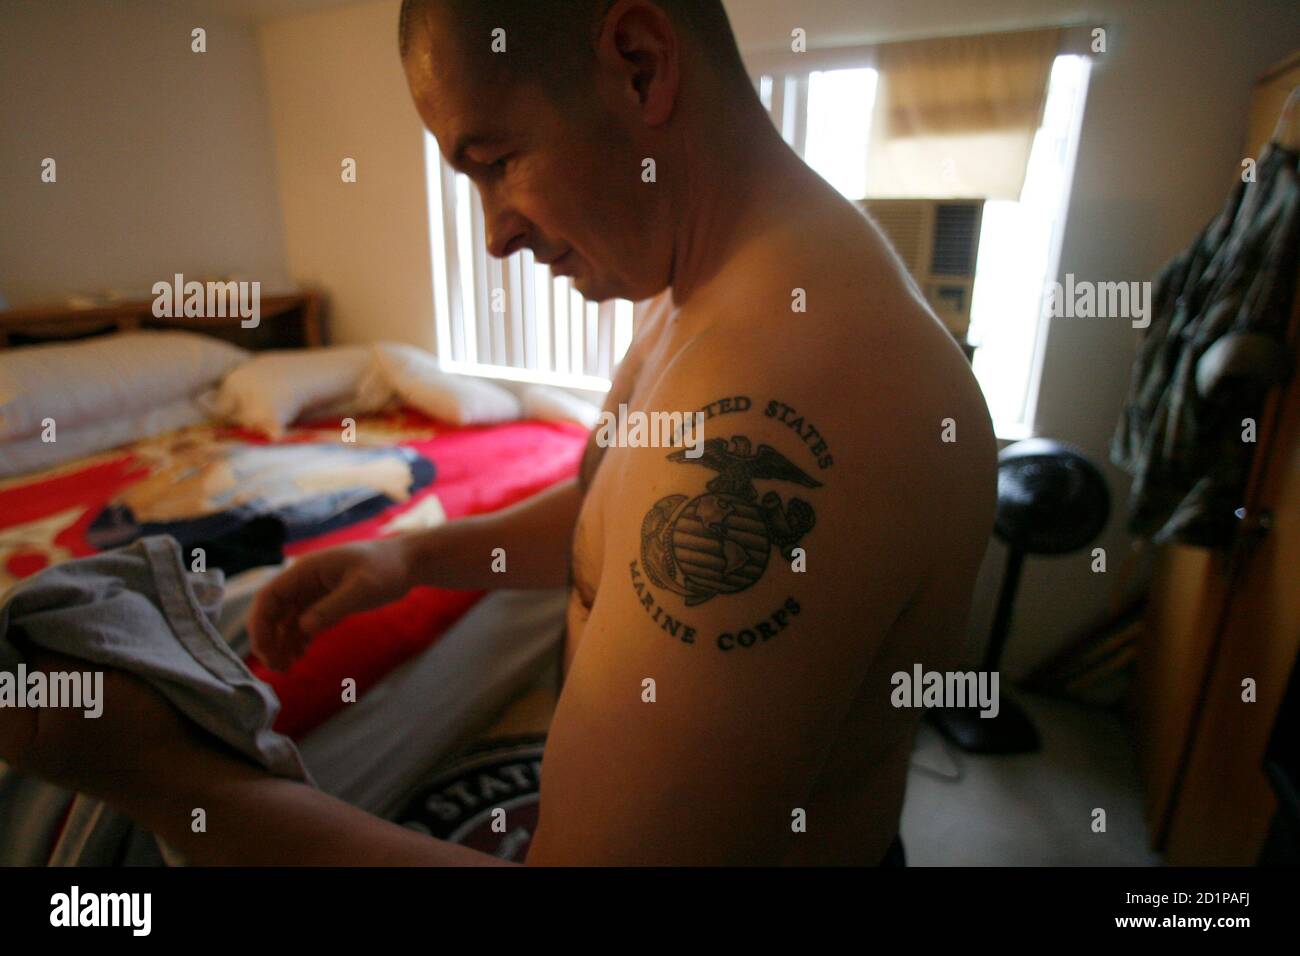 Iraq war veteran Ken Sargent gets dressed at his home in the early morning hours of March 14, 2007. On August 5, 2004, a bullet erased most of Sargent's vision and blew two inches off the left side of his brain, destroying parts of his memory and mental function. Picture shot March 14, 2007. REUTERS/Mike Blake  (UNITED STATES) Stock Photo